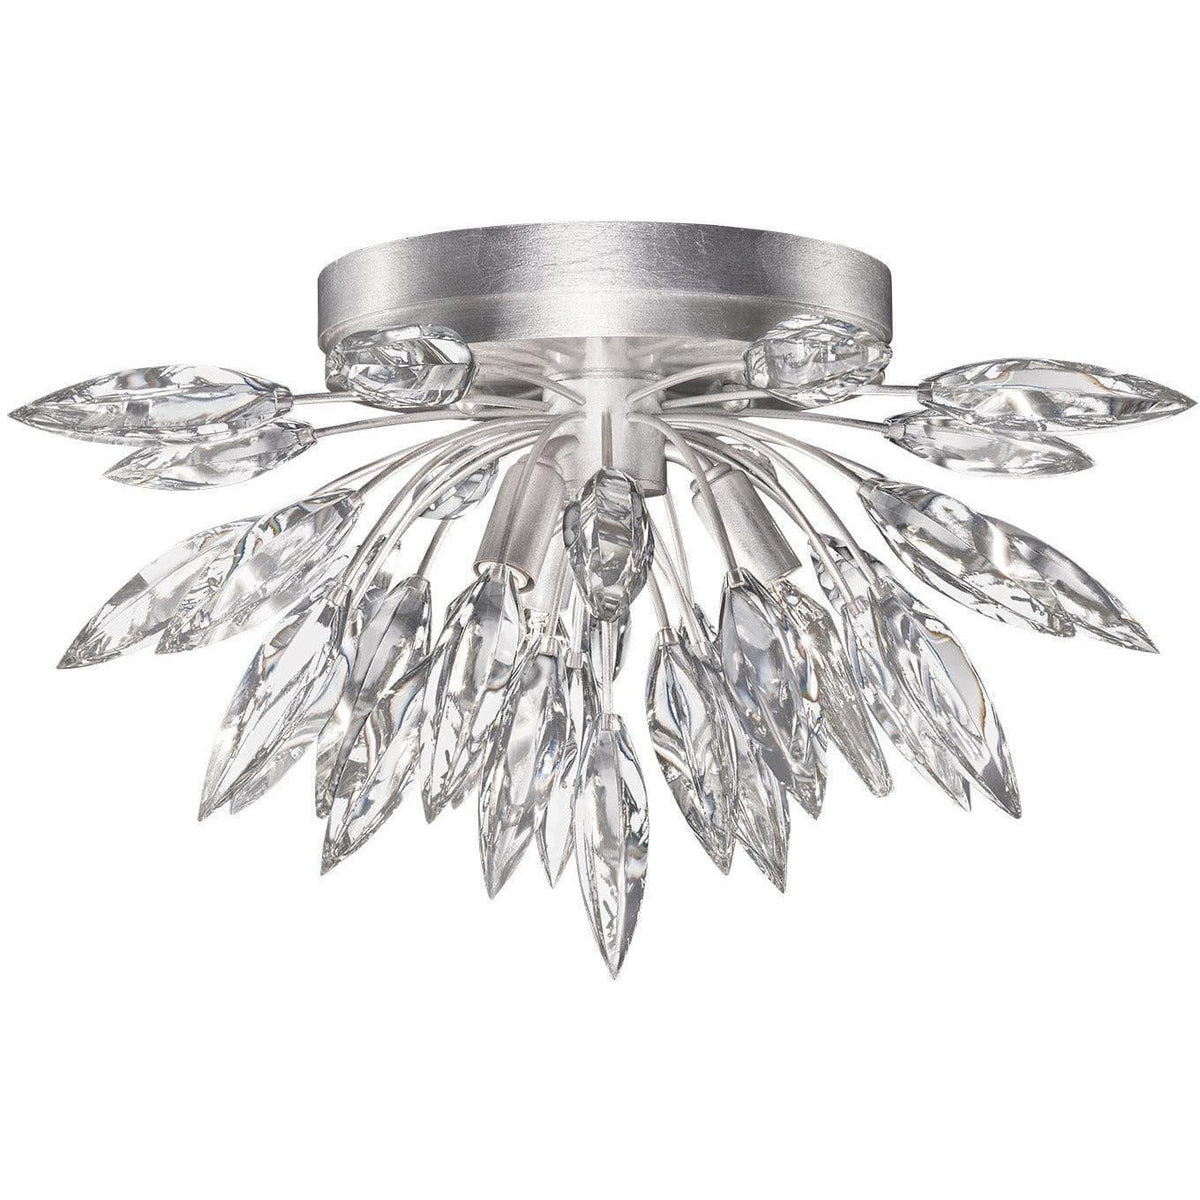 Montreal Lighting & Hardware - Lily Buds 18-Inch Three Light Flush Mount by Fine Art Handcrafted Lighting | Open Box - 881440ST-OB | Montreal Lighting & Hardware